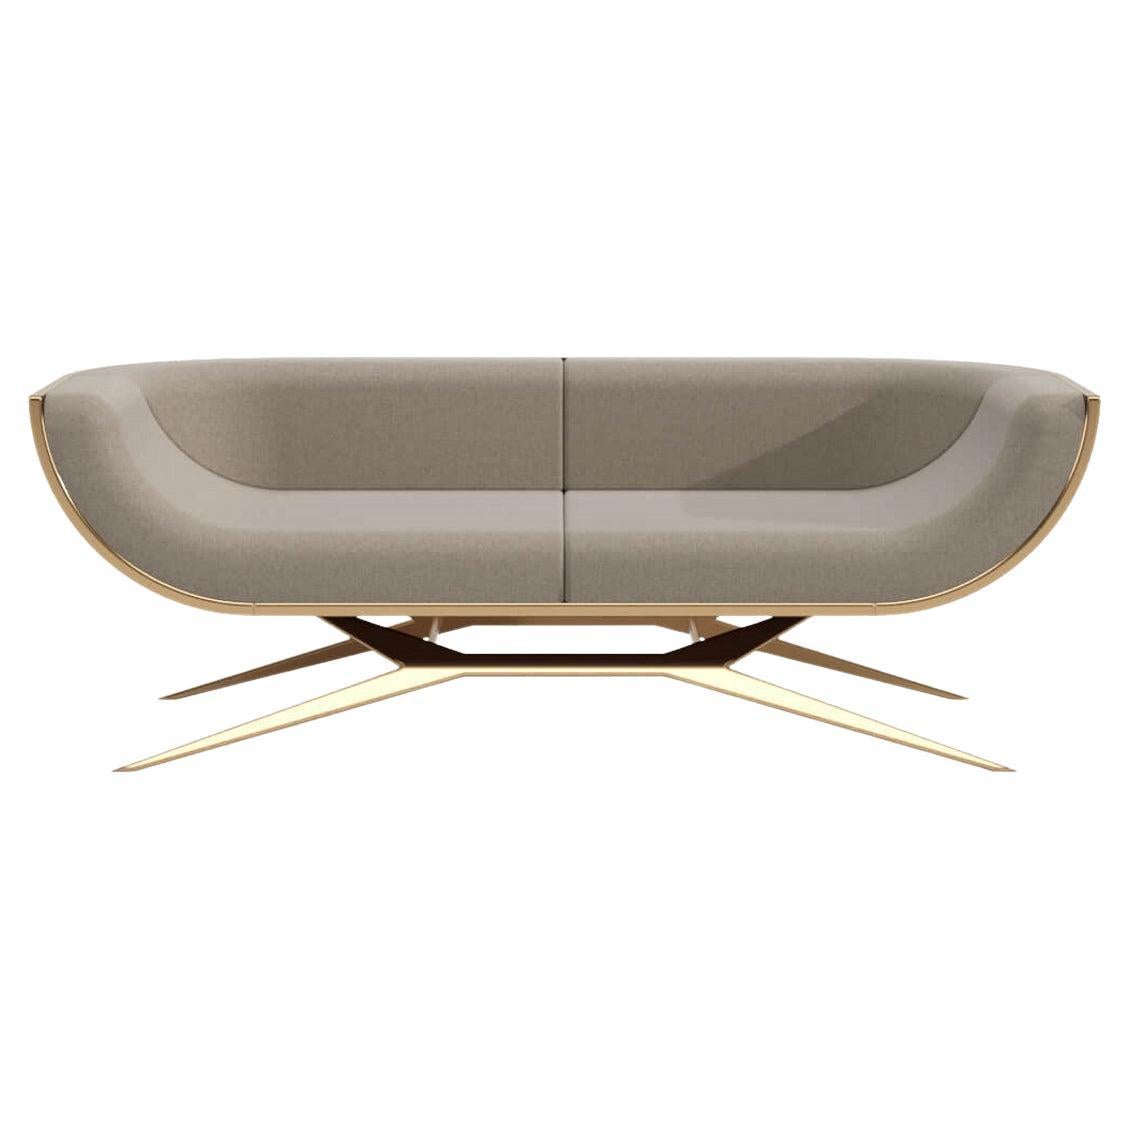 21st Century Modern Curved Back Two-Seater Sofa in Wood, Brass and Gold Finish